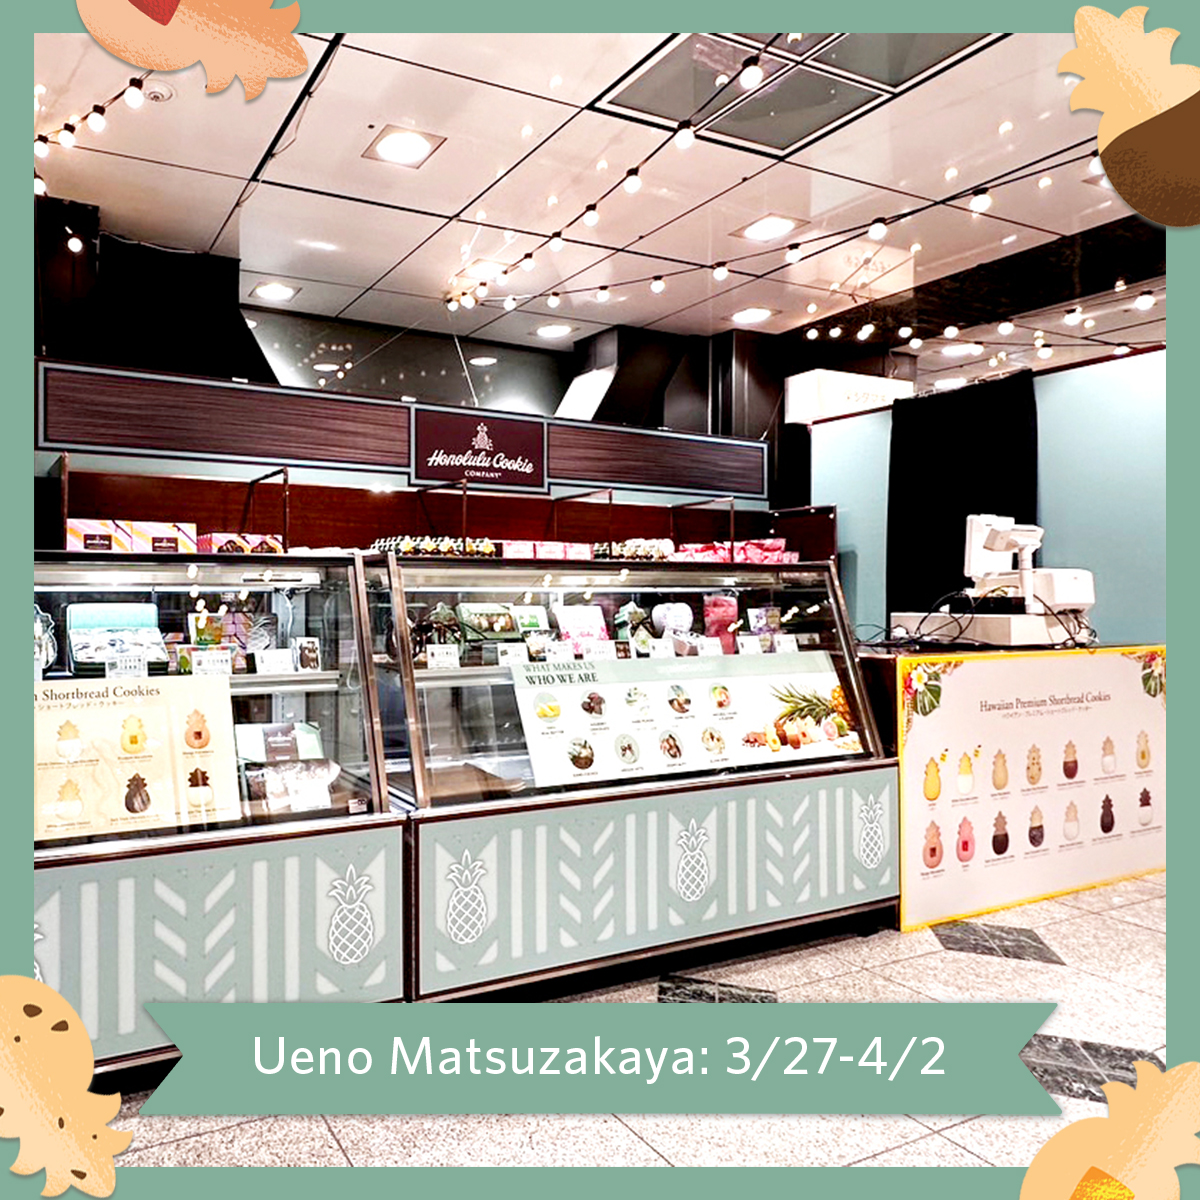 Indulge in the sweet life, Japan! 🍪 Shop with us at our latest pop-up happening now at Ueno Matsuzakaya until April 2nd! Don’t miss the chance to shop our newest spring Floral Lei Collection and seasonal Lemon flavors. Treat yourself to a little taste from Hawaii! 🌺